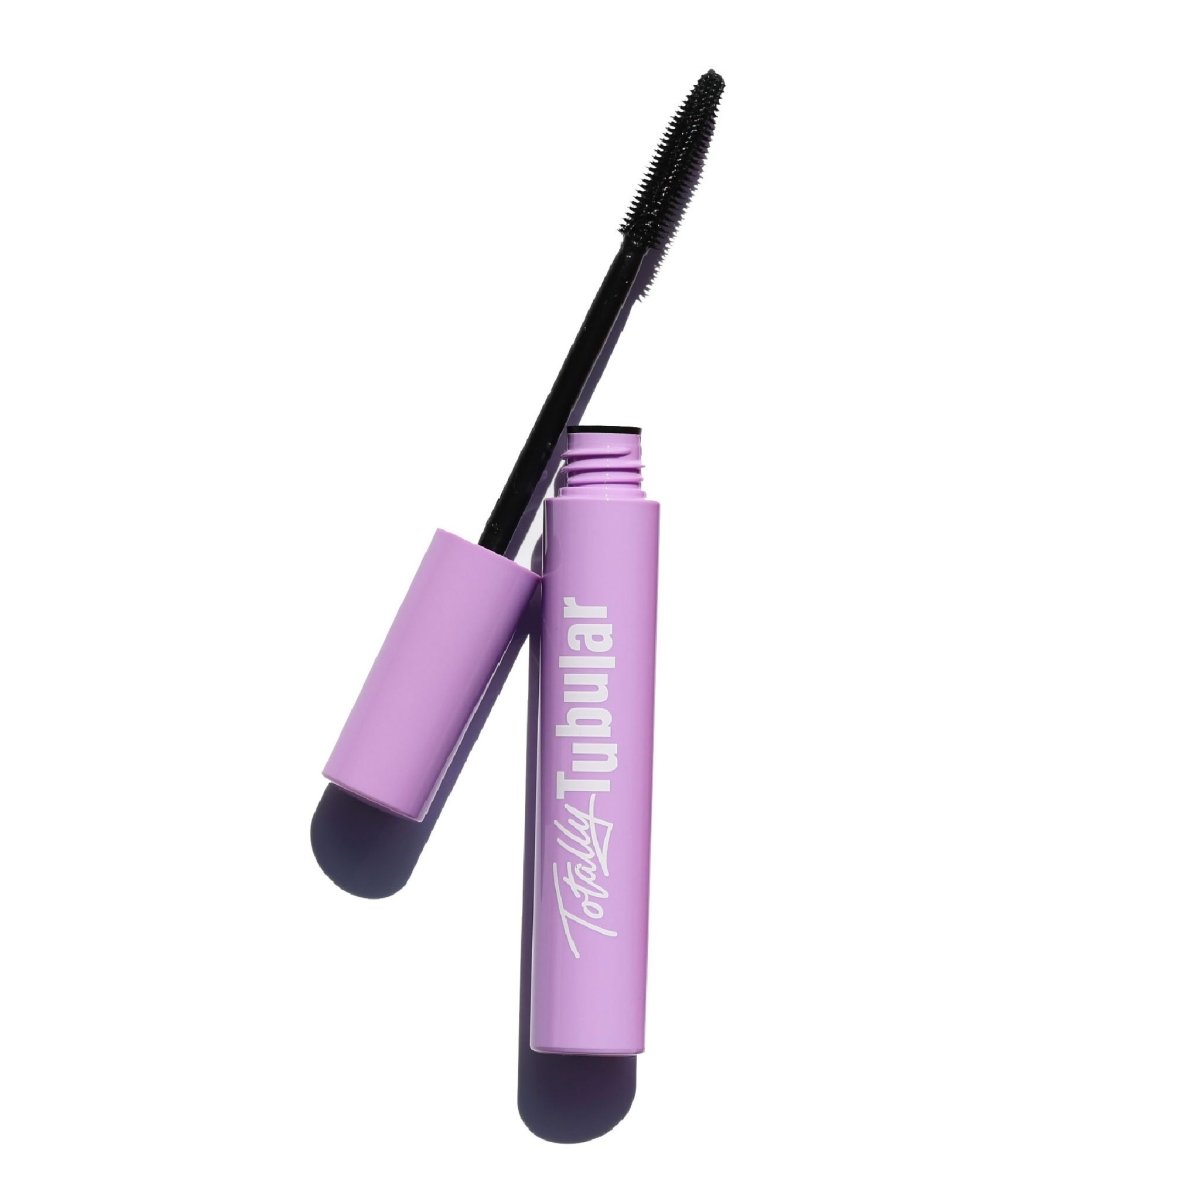 open purple mascara tube with black plastic cone applicator - totally tubular mascara, the heights - half caked makeup